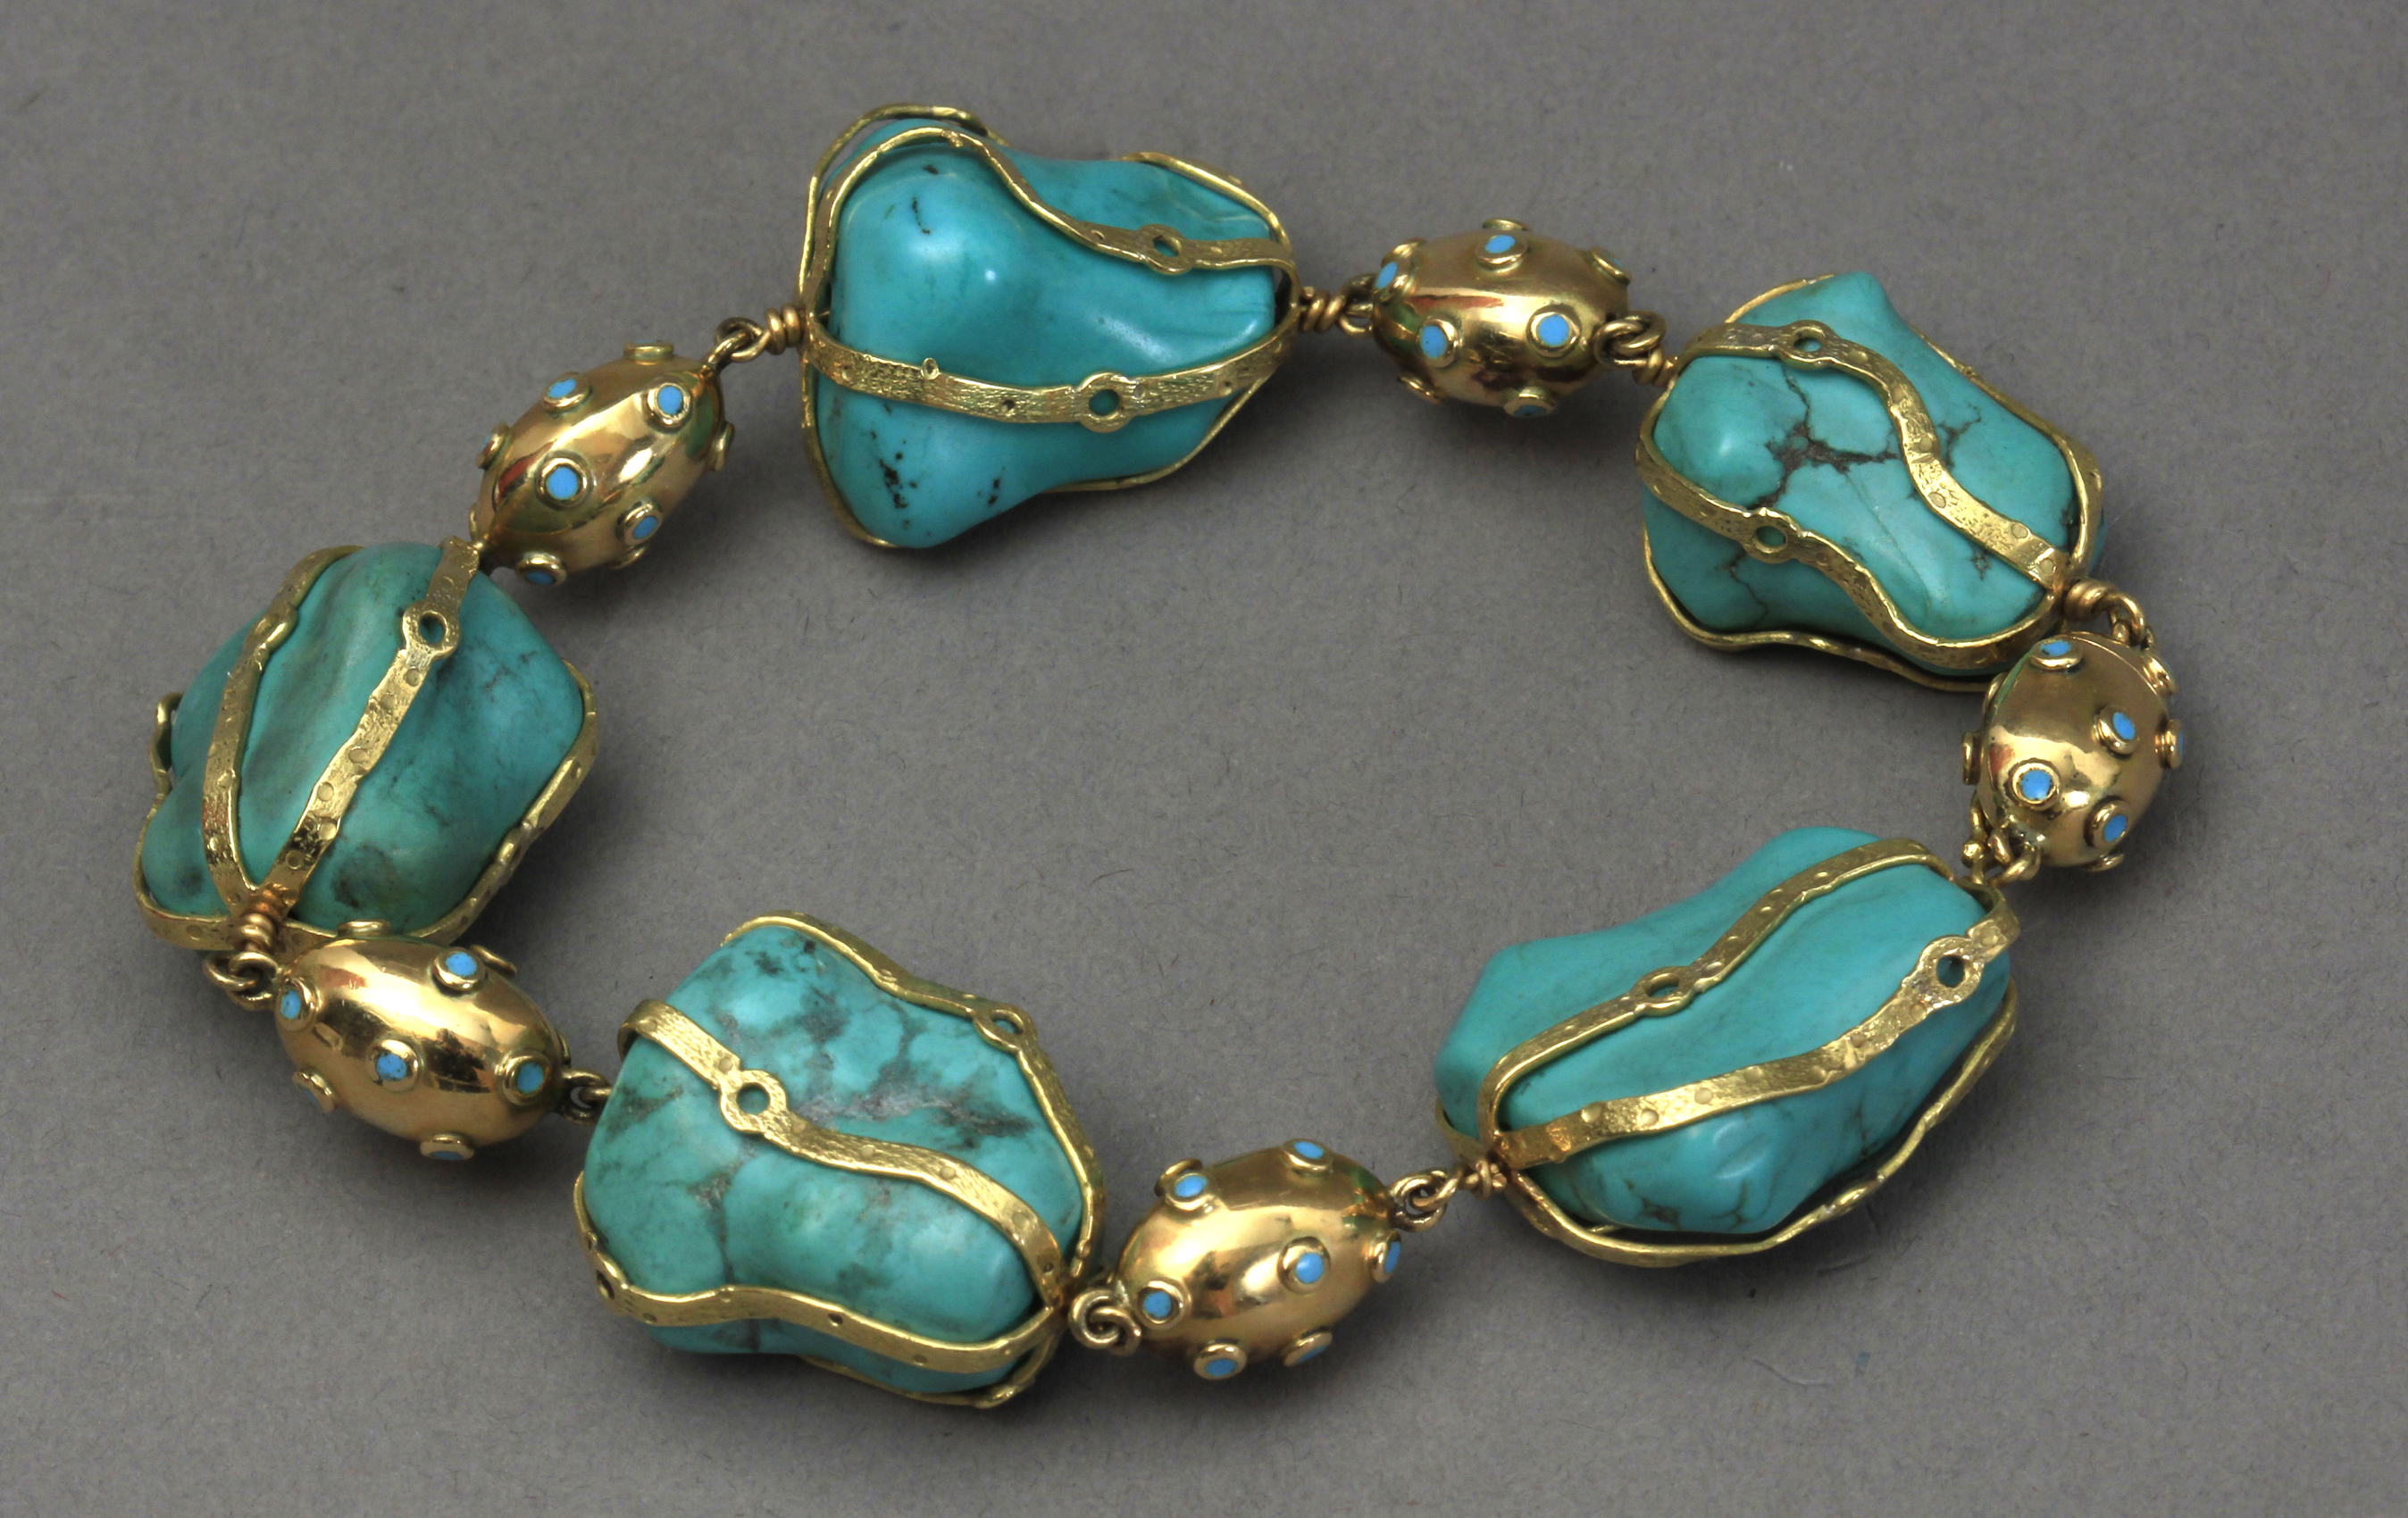 A rough turquoise beads and 18k. yellow gold bracelet